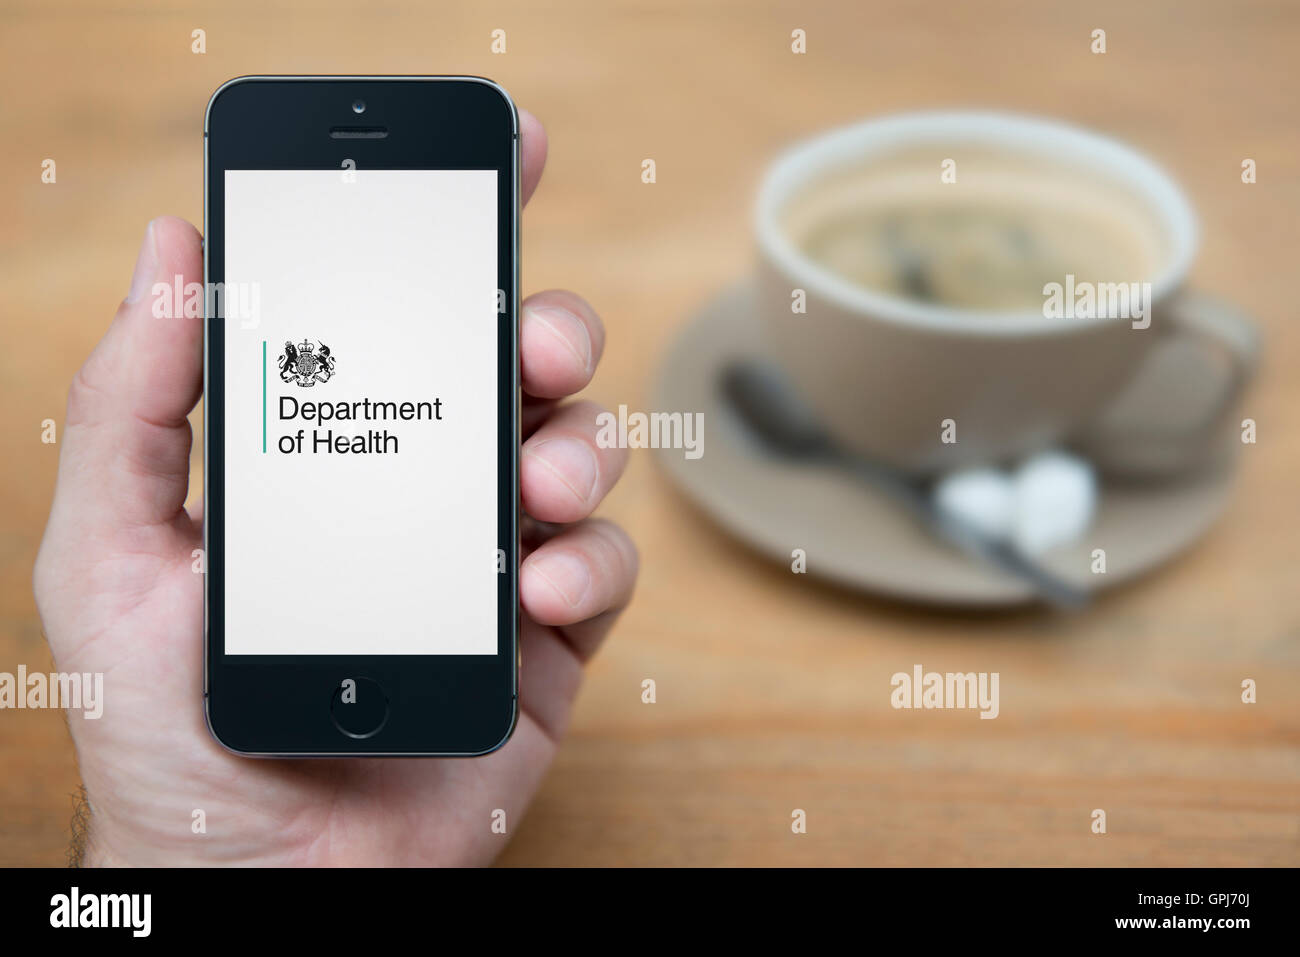 A man looks at his iPhone which displays the UK Government Department of Health logo, with coffee (Editorial use only). Stock Photo